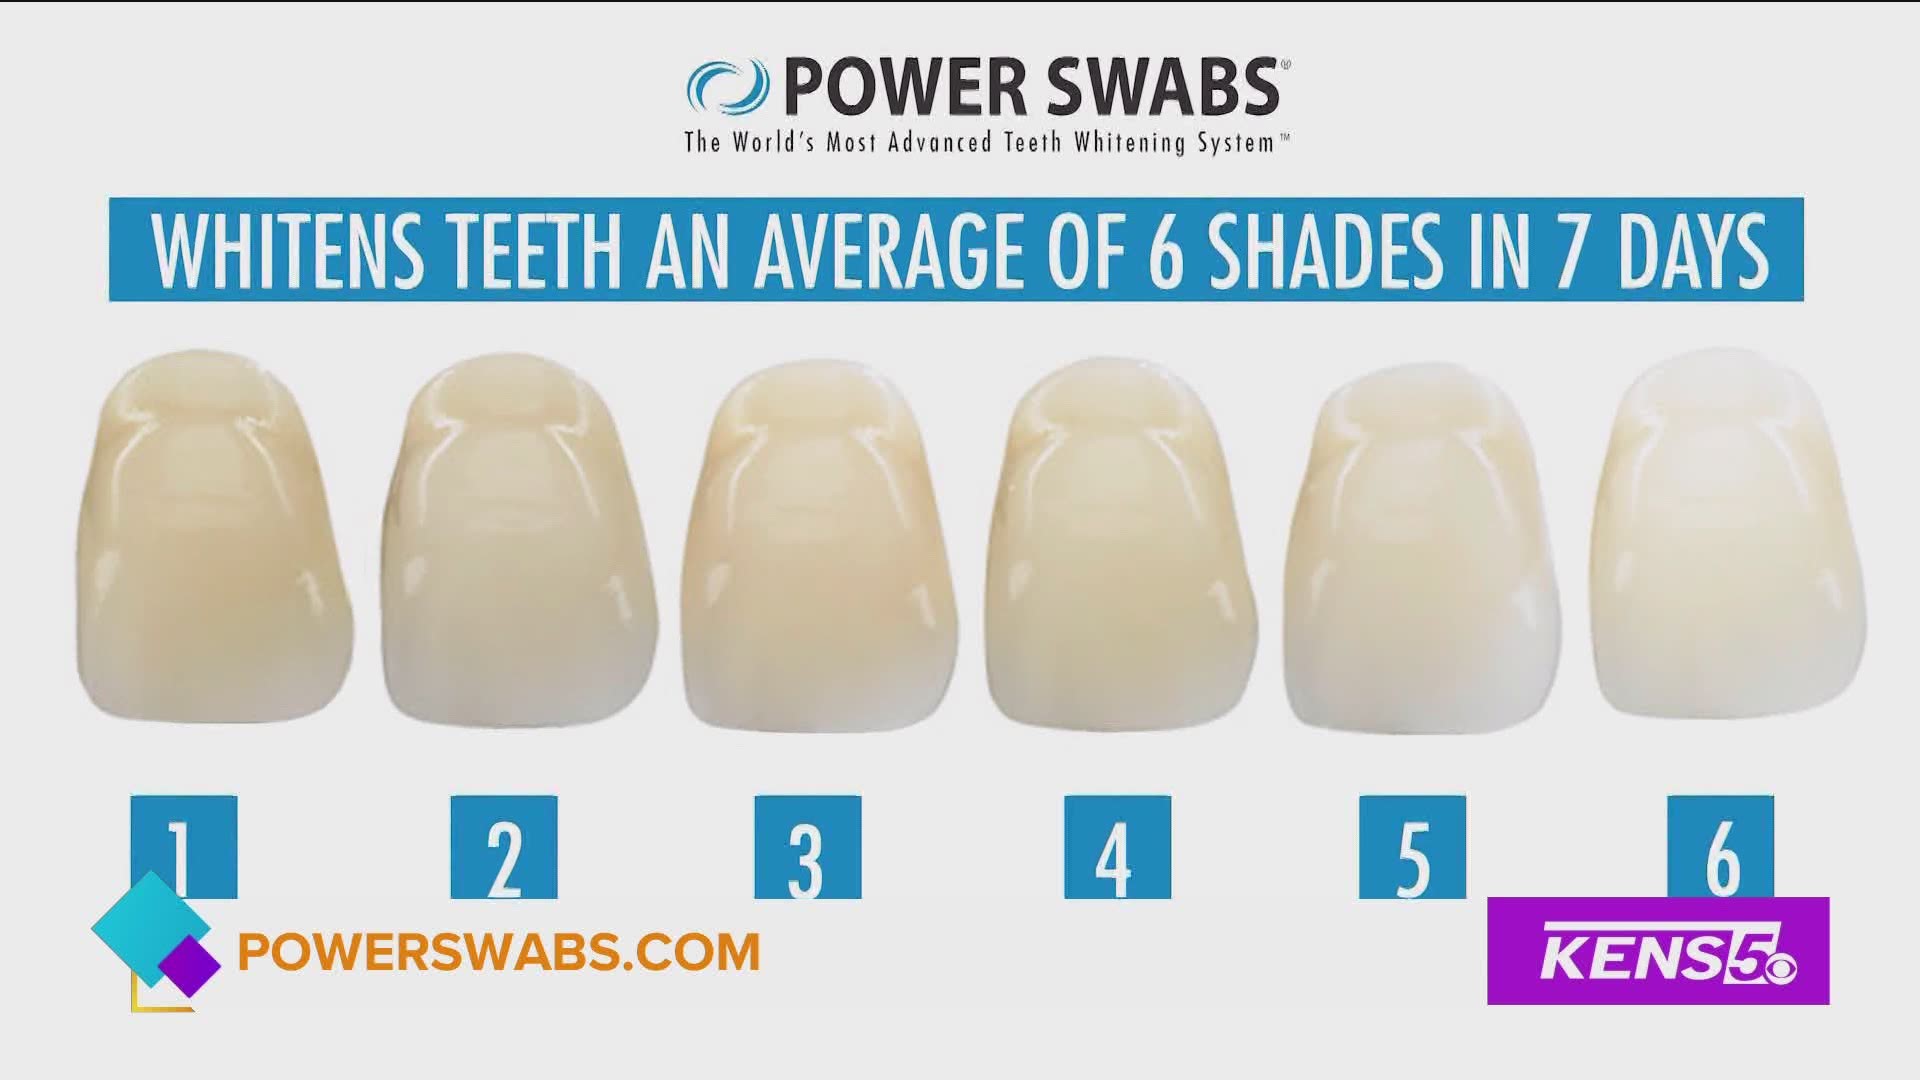 Power Swabs teeth whitening system has gone world wide. They share how you can have whiter teeth in just 5 minutes.